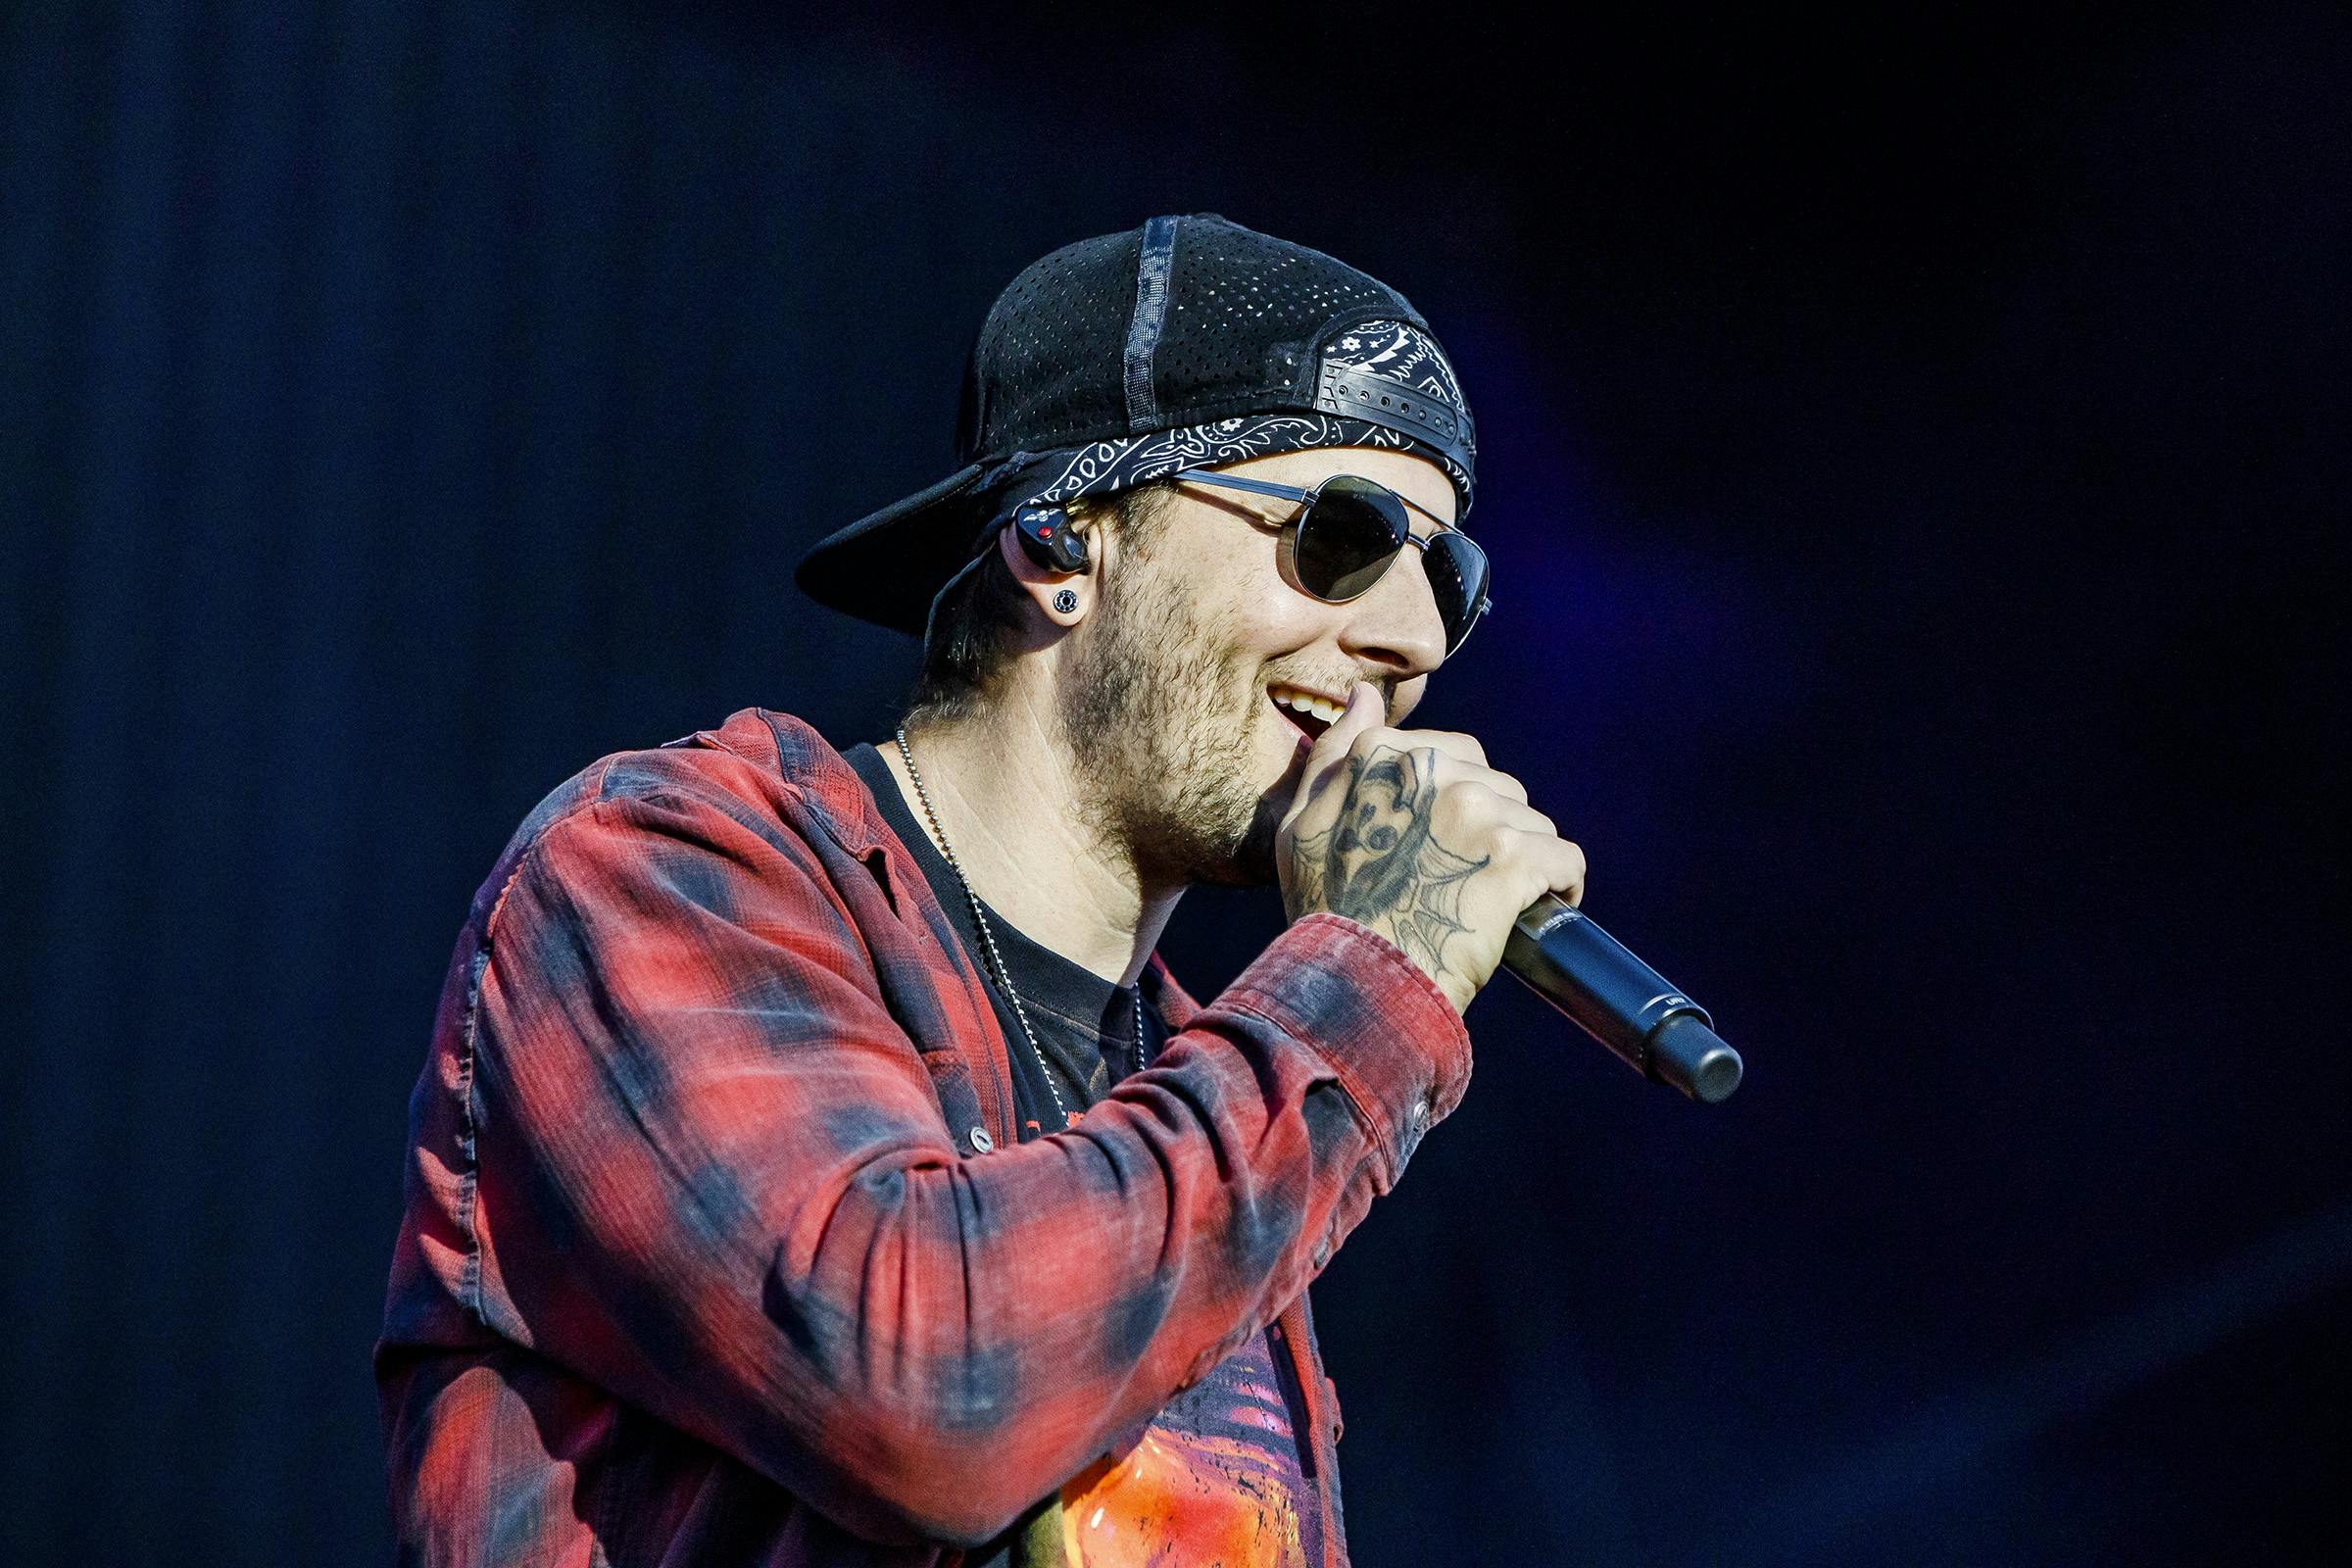 Avenged Sevenfold's M. Shadows: The gigs that changed my life